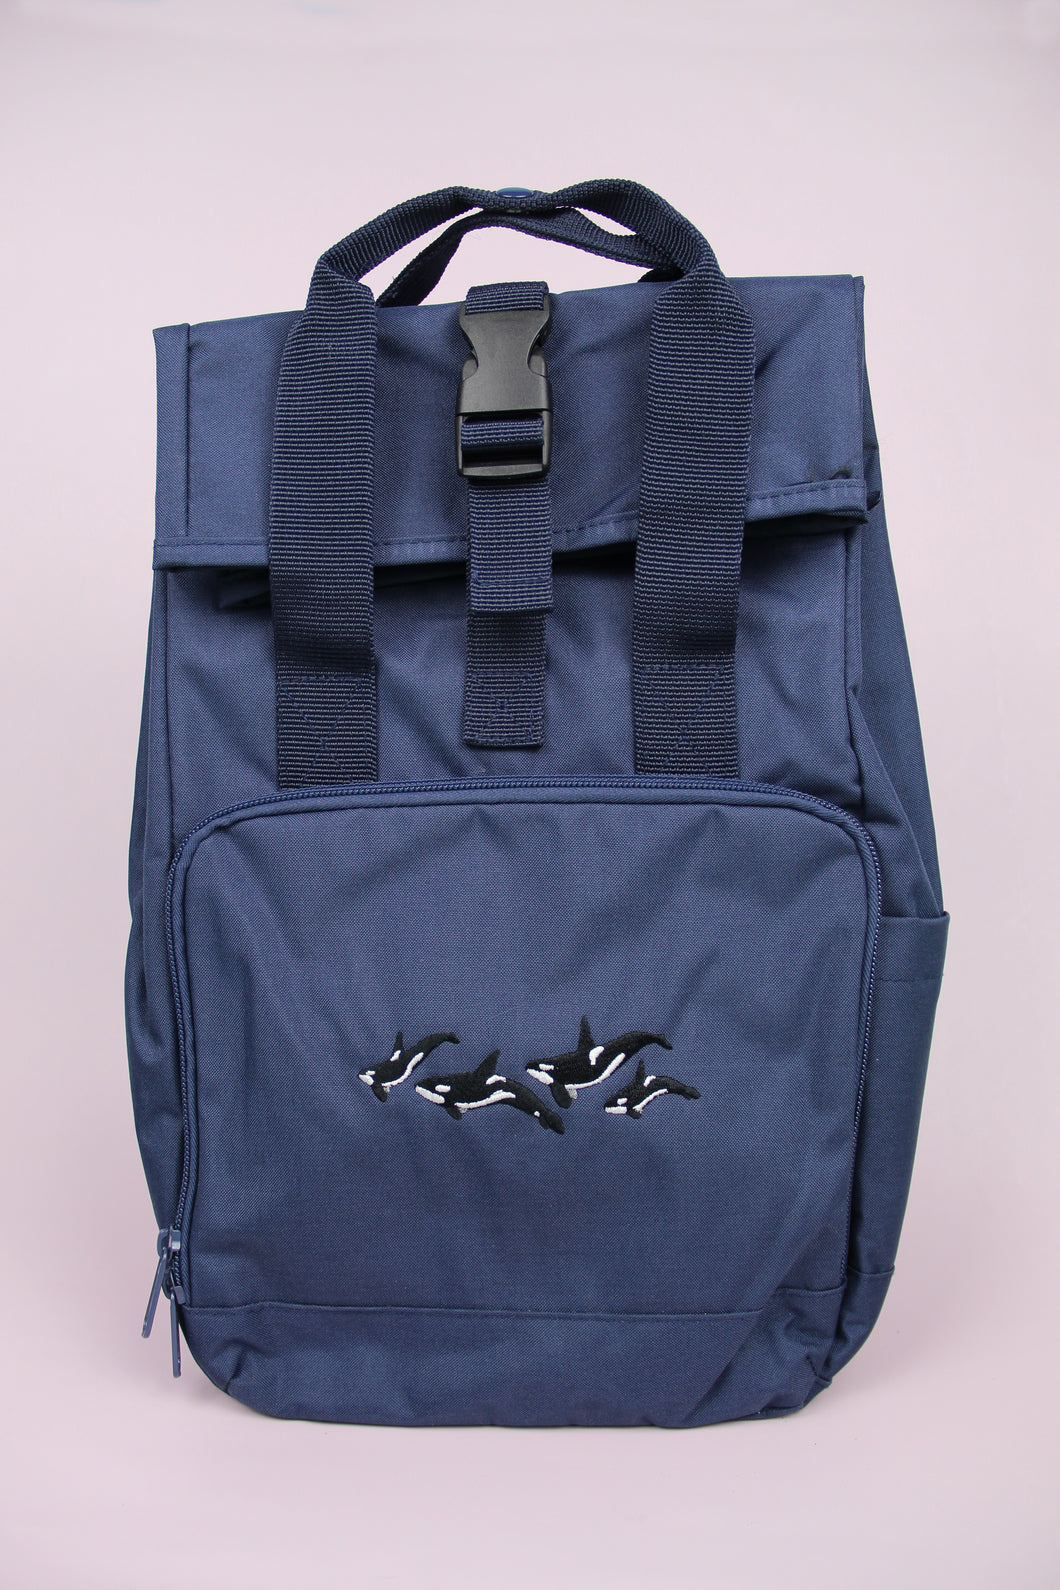 Orca Pod Recycled Backpack - Navy